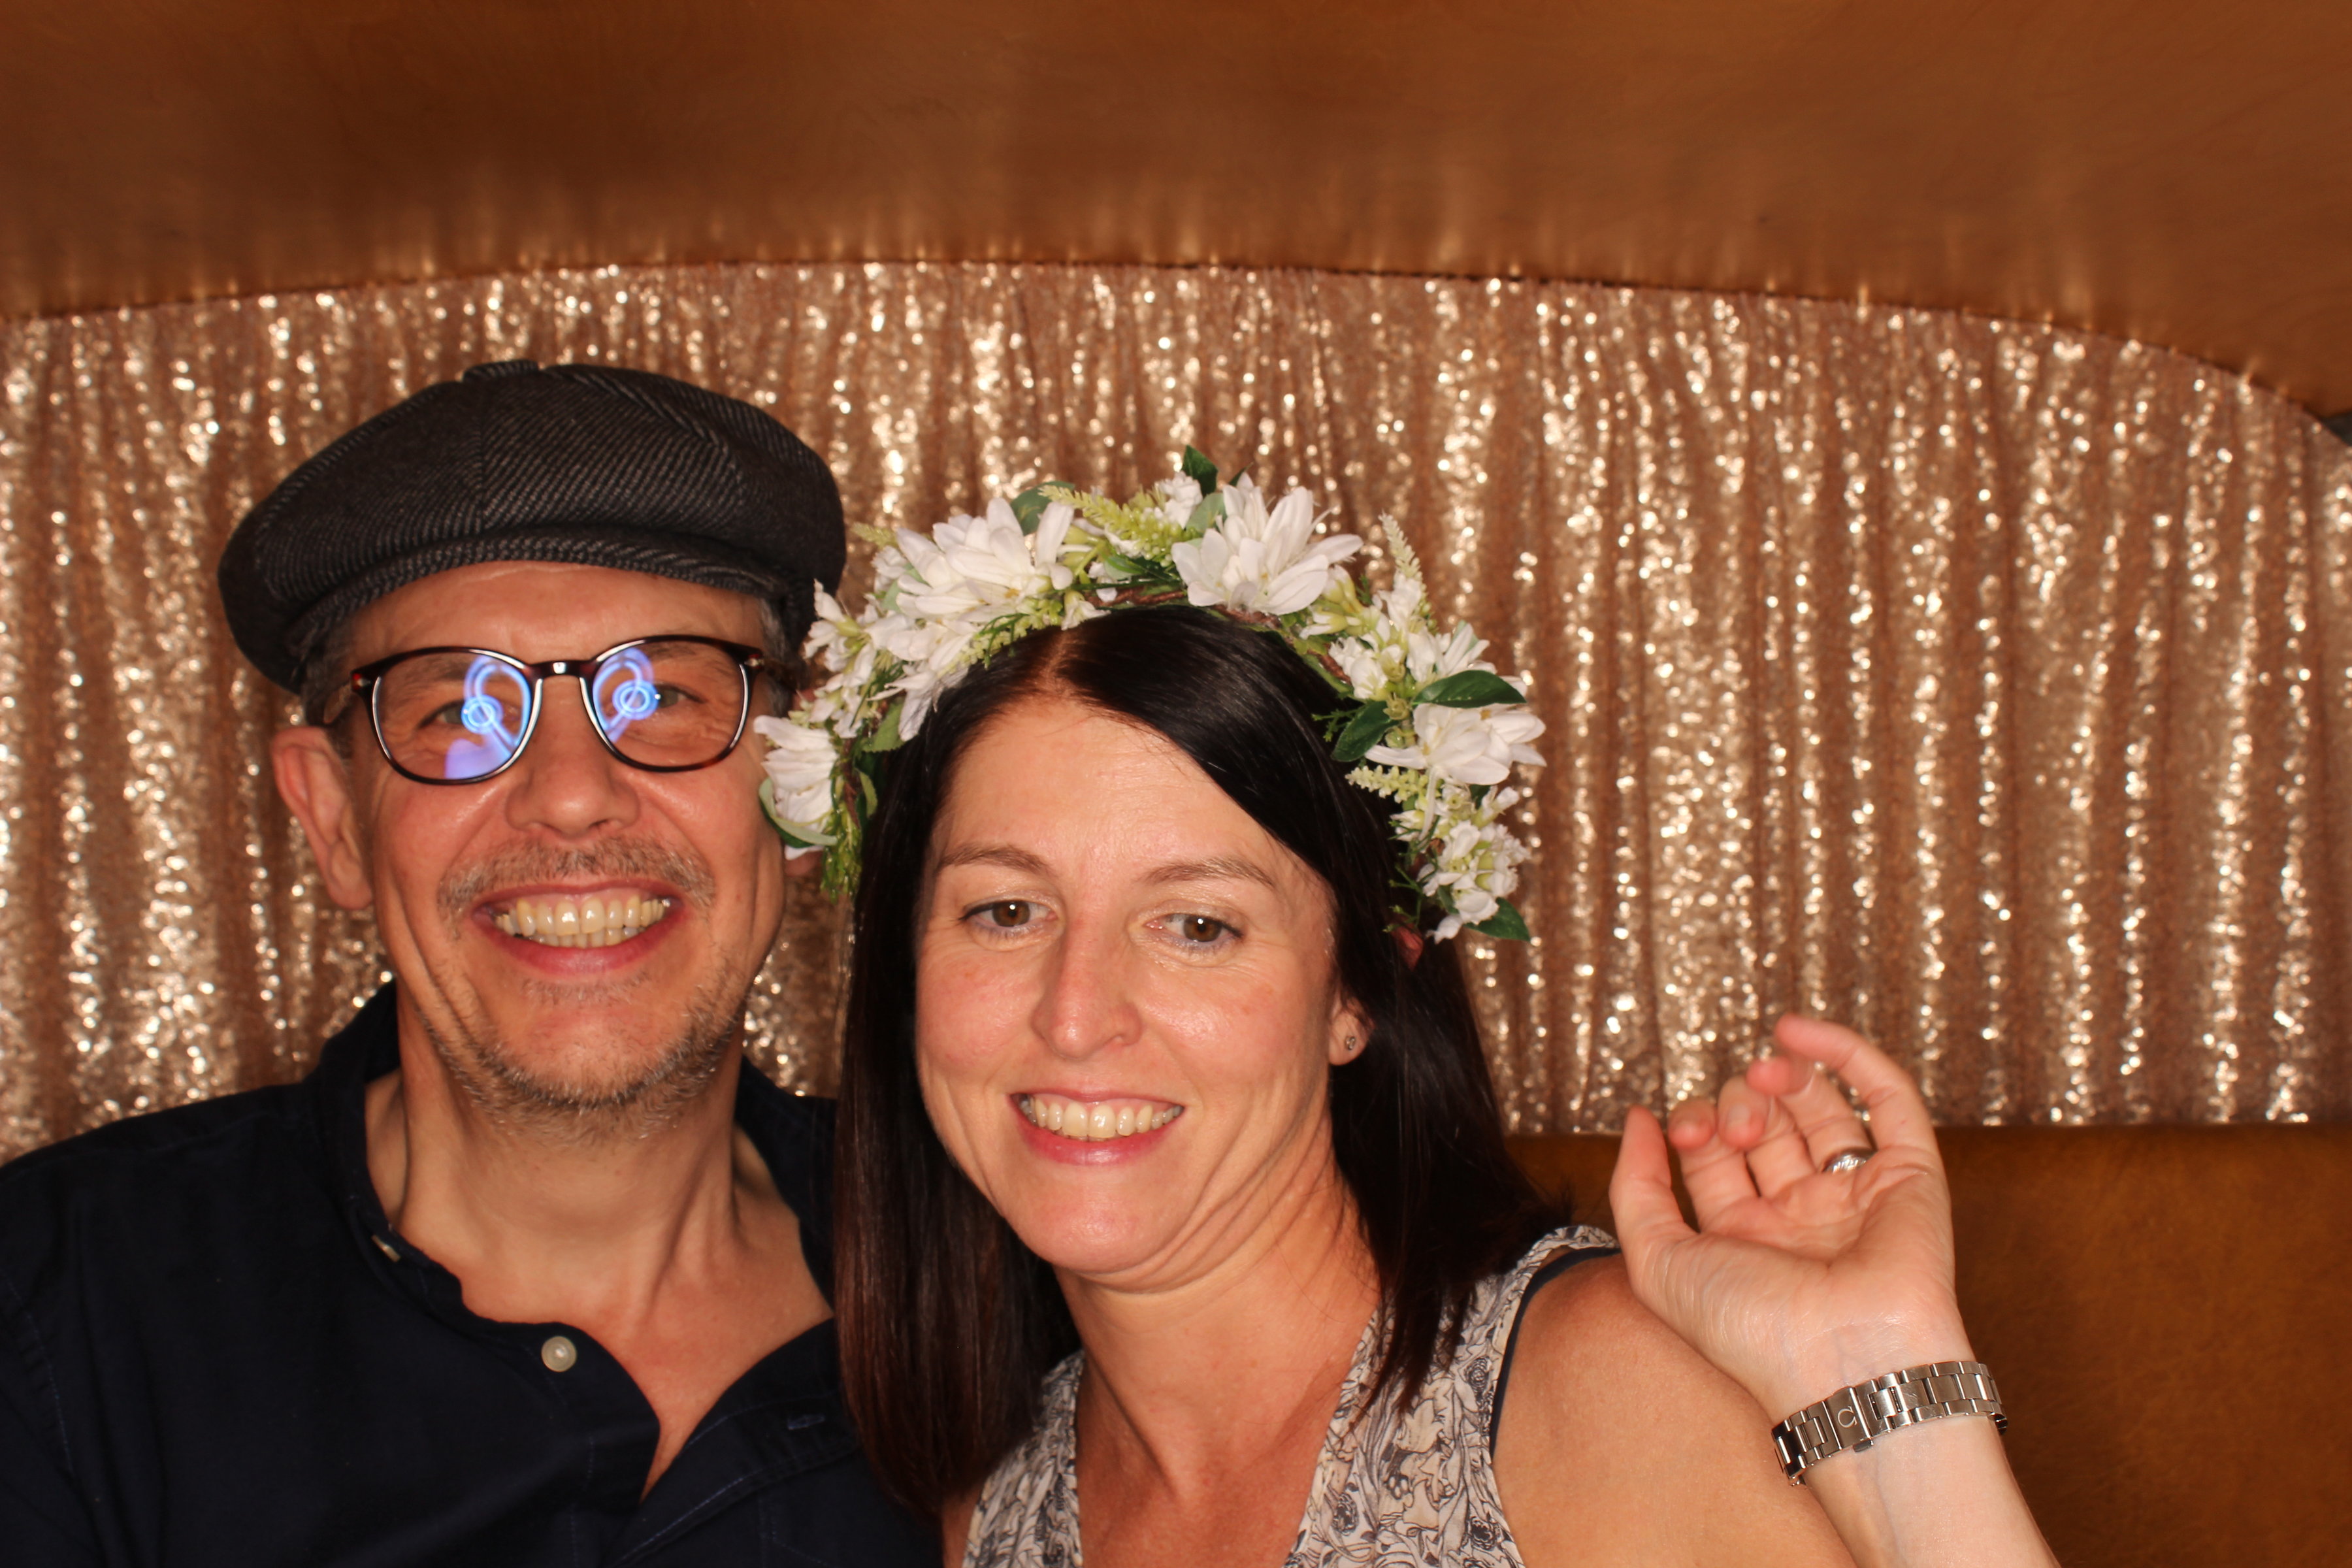 Mansfield Monk 25th anniversary celebrations - people dressed up in photo booth